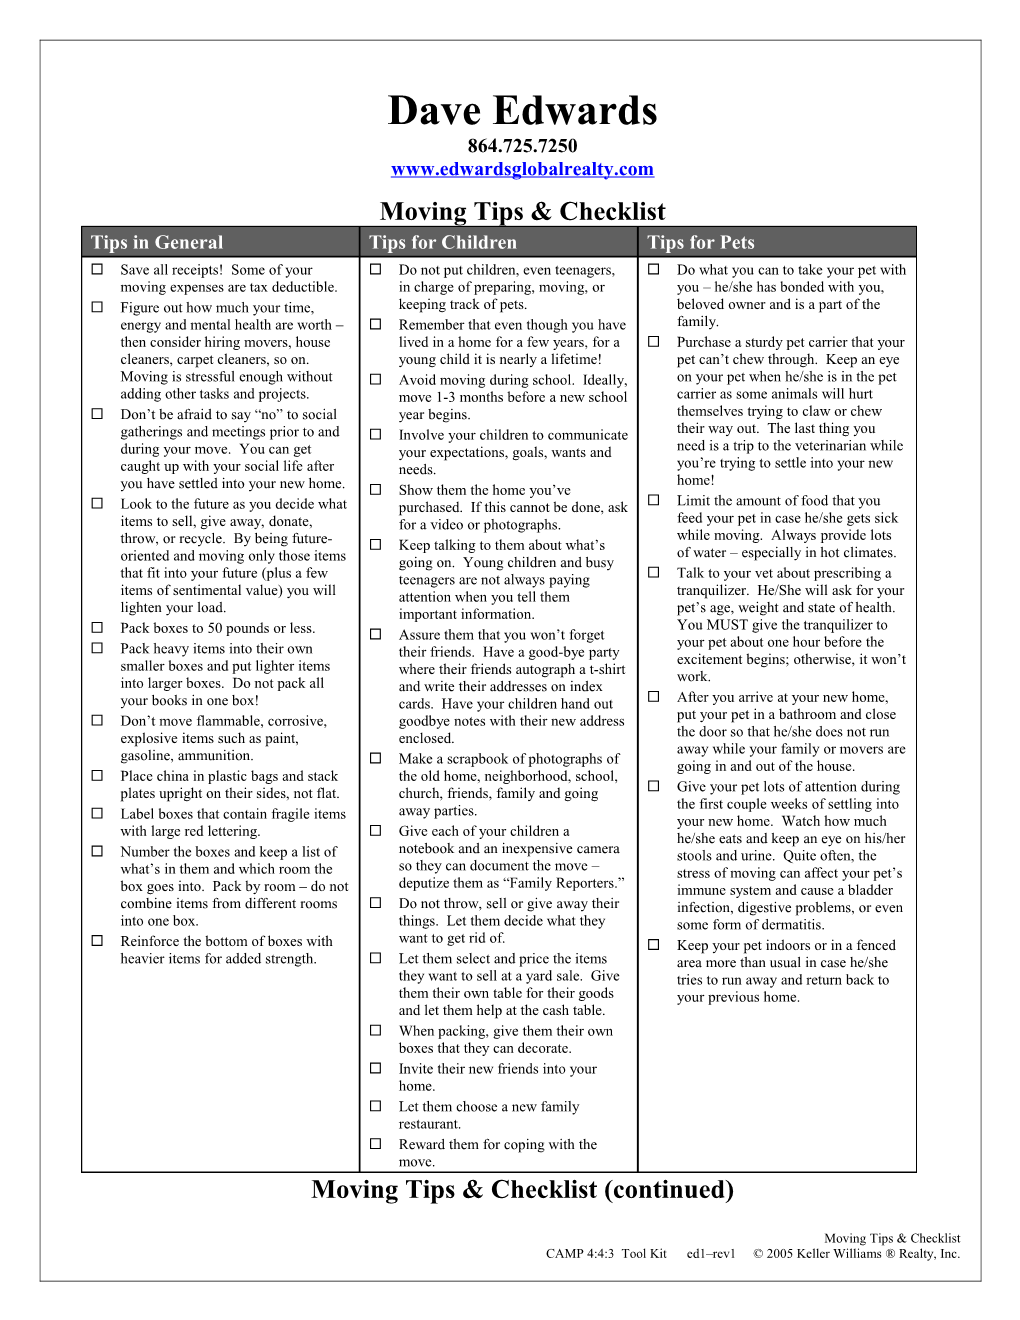 Moving Tips Checklist (Continued)